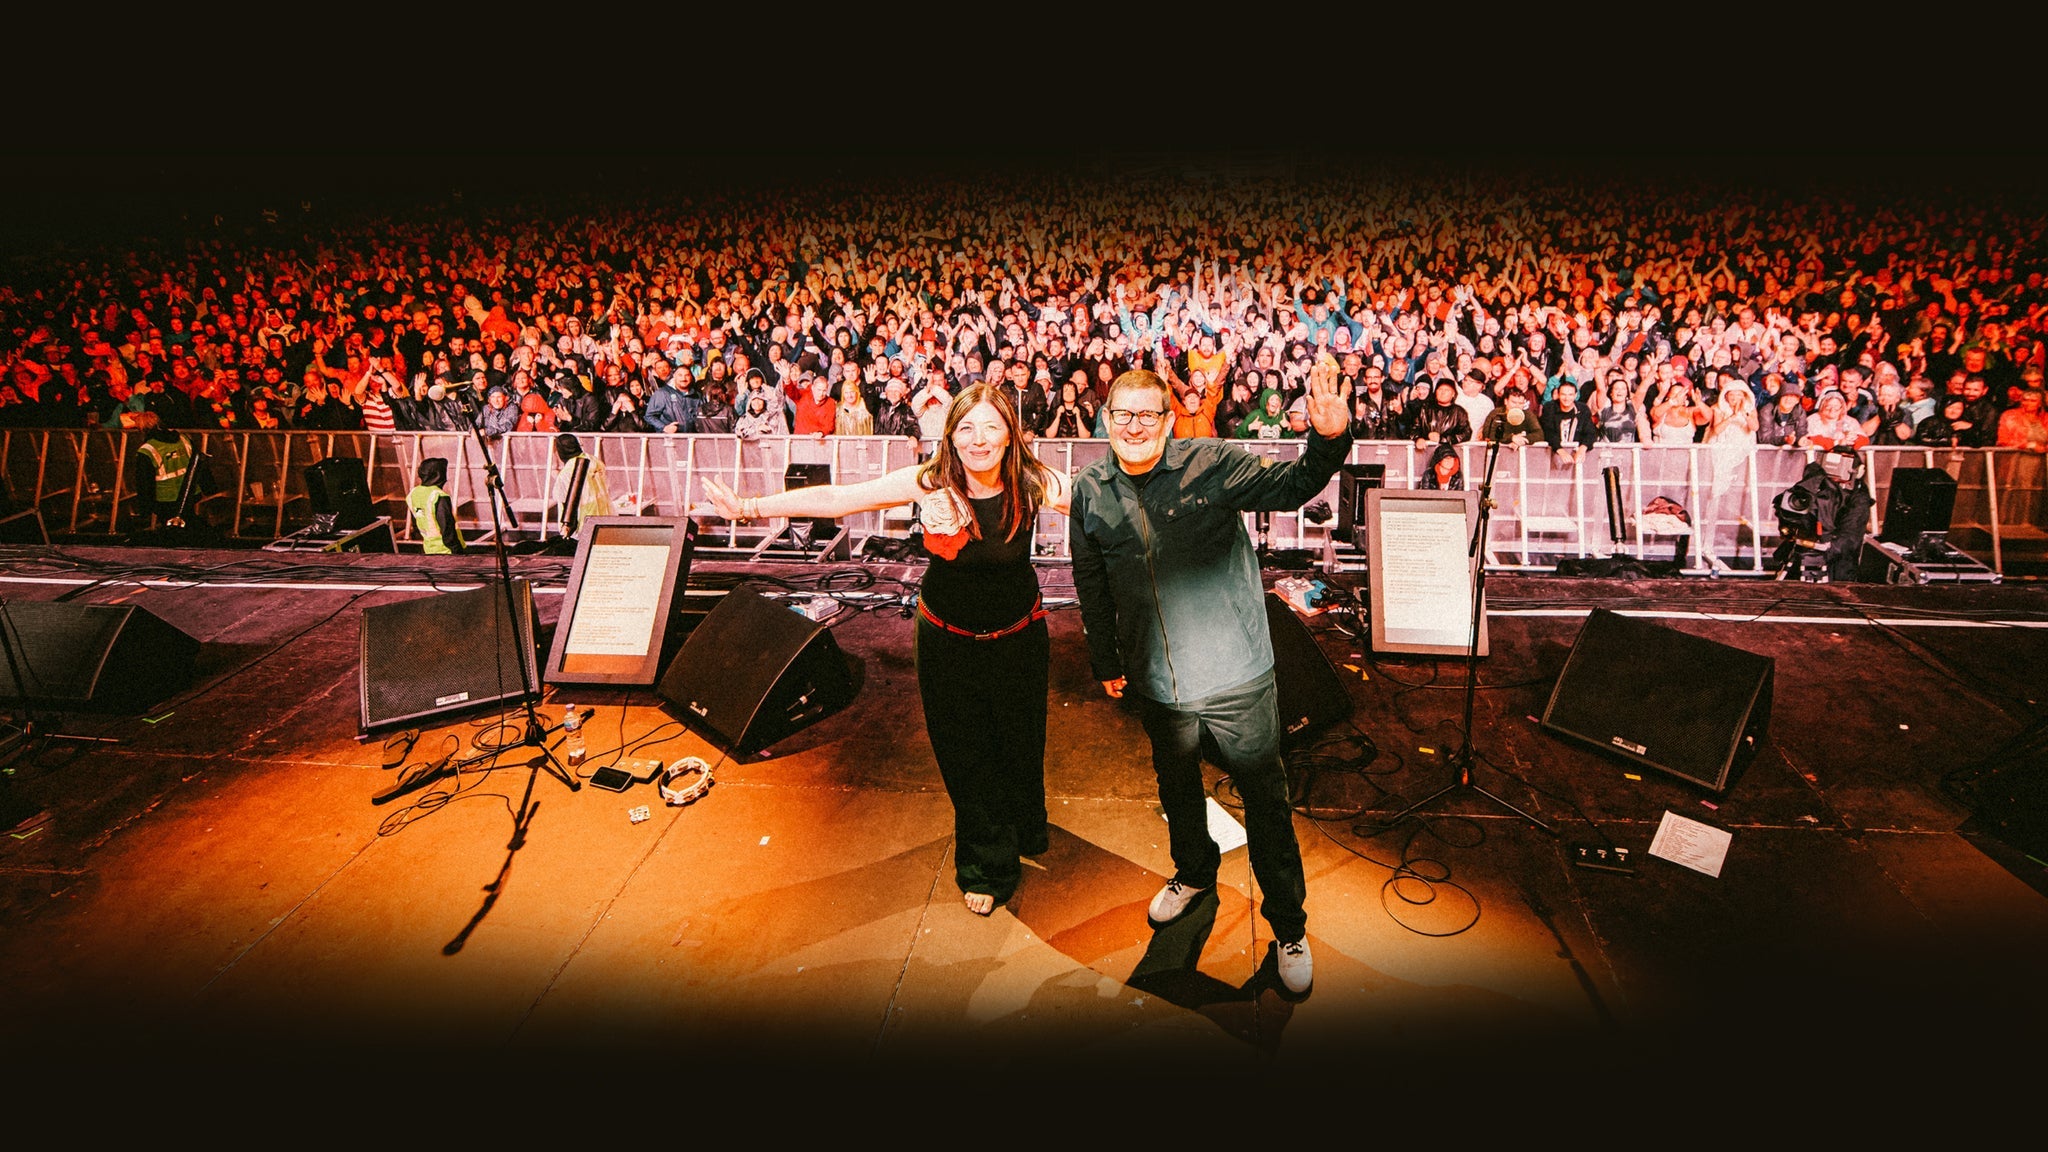 Image used with permission from Ticketmaster | Paul Heaton & Jacqui Abbott tickets